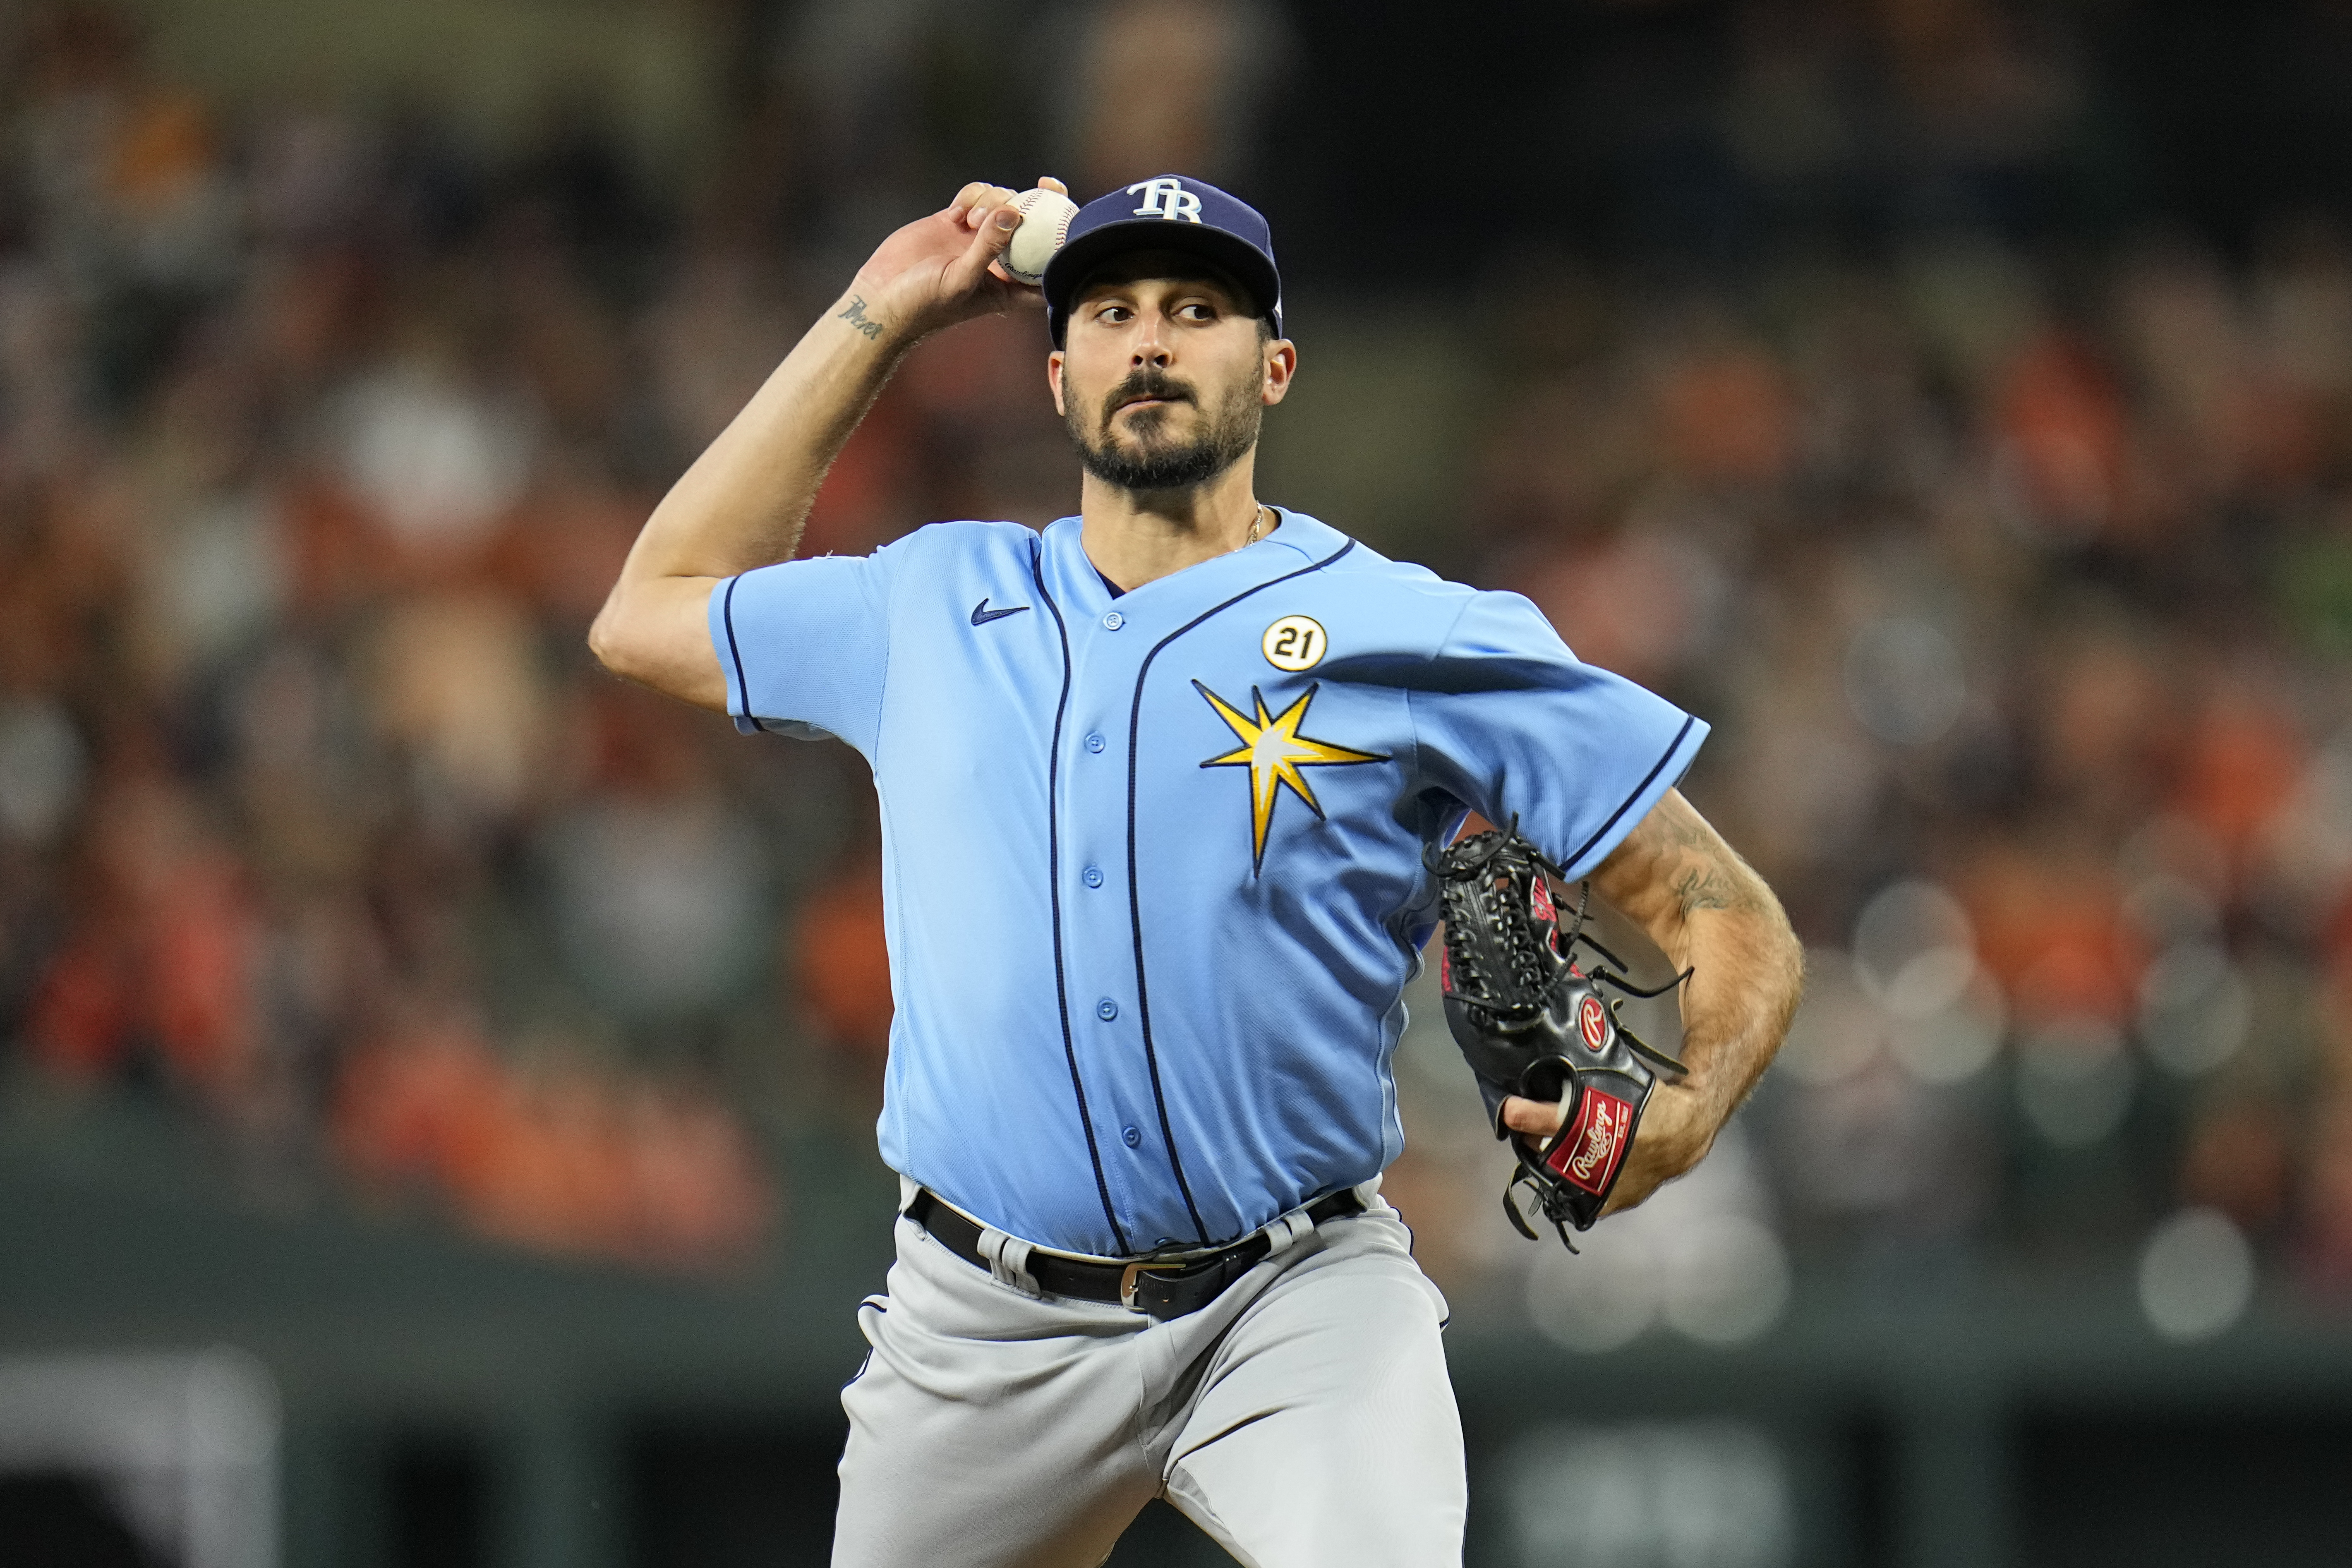 Rays tie Orioles atop AL East with latest win